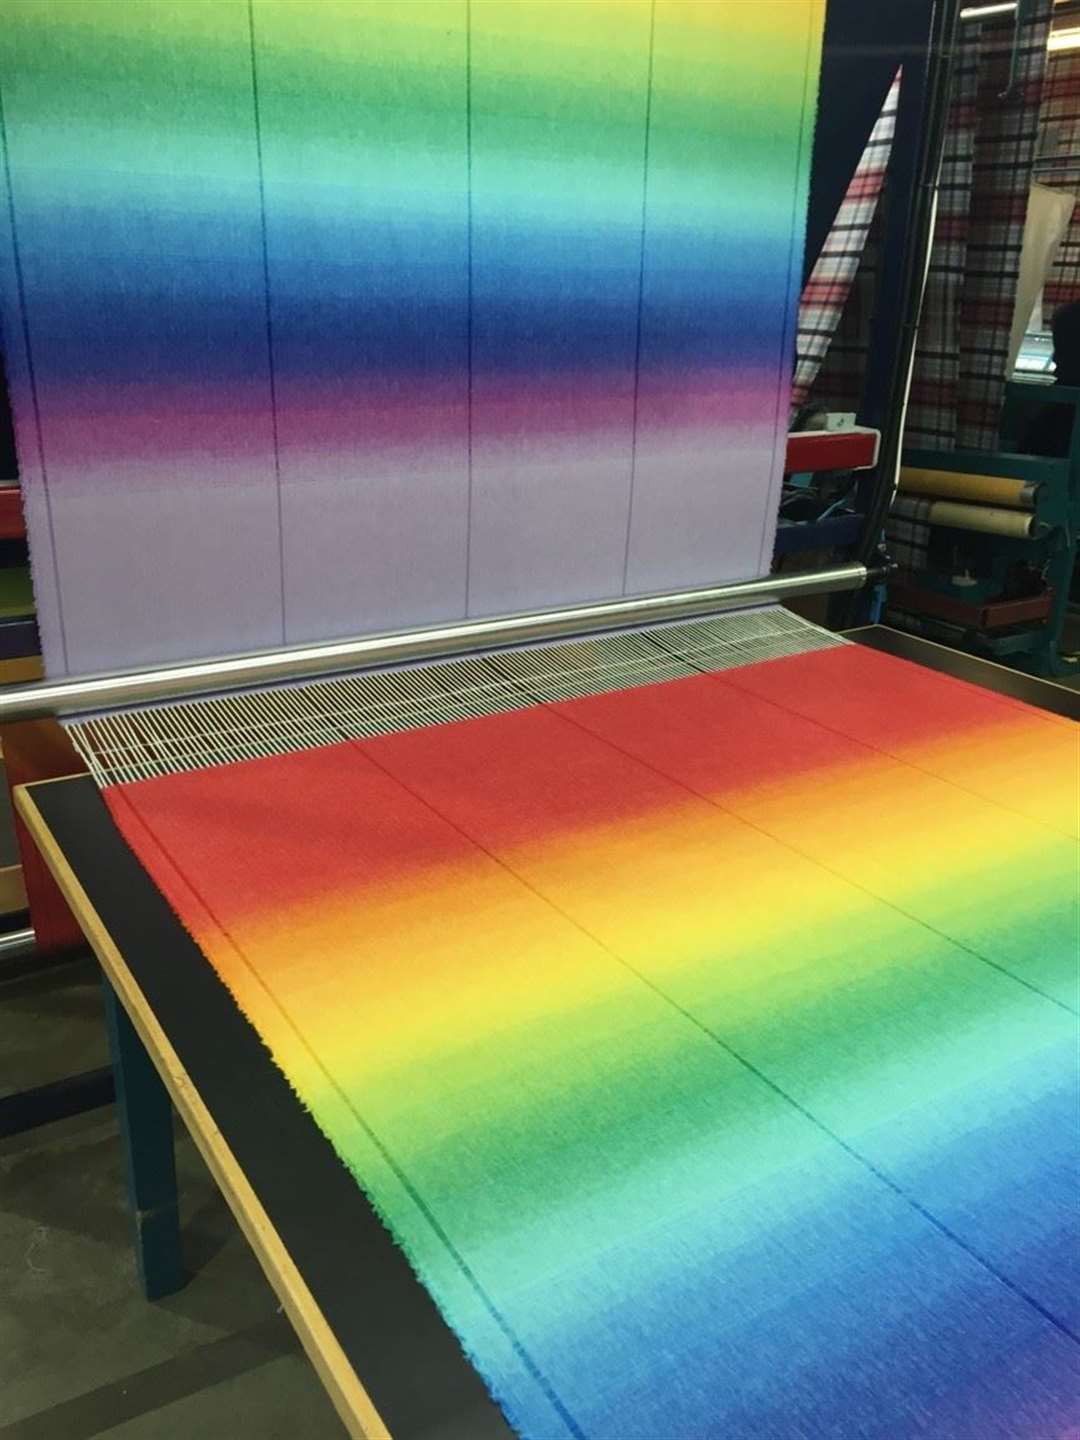 The scarf being made.